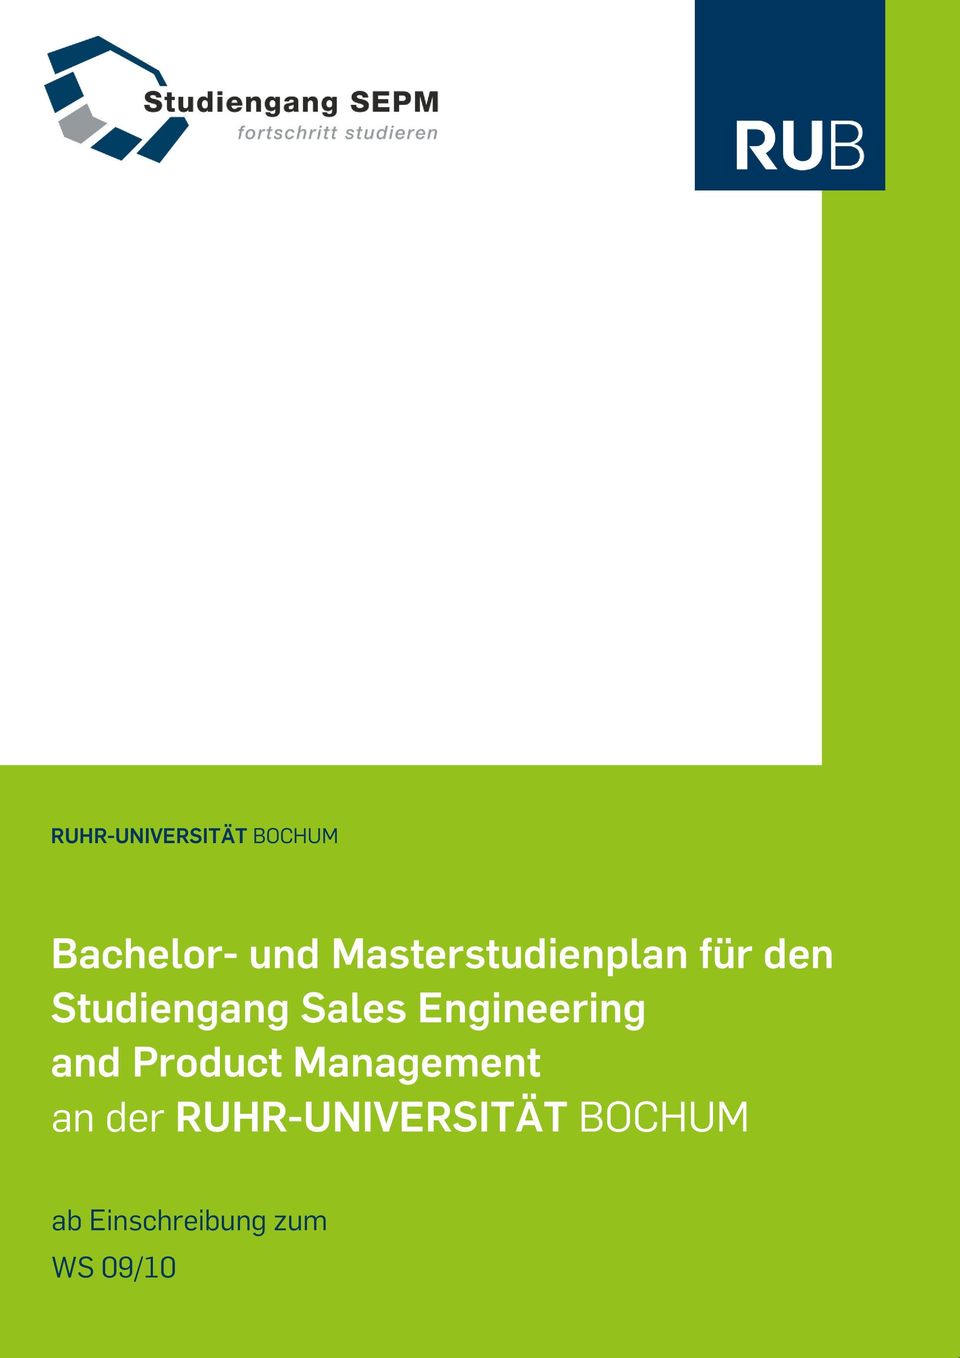 Engineering and Product Management an der